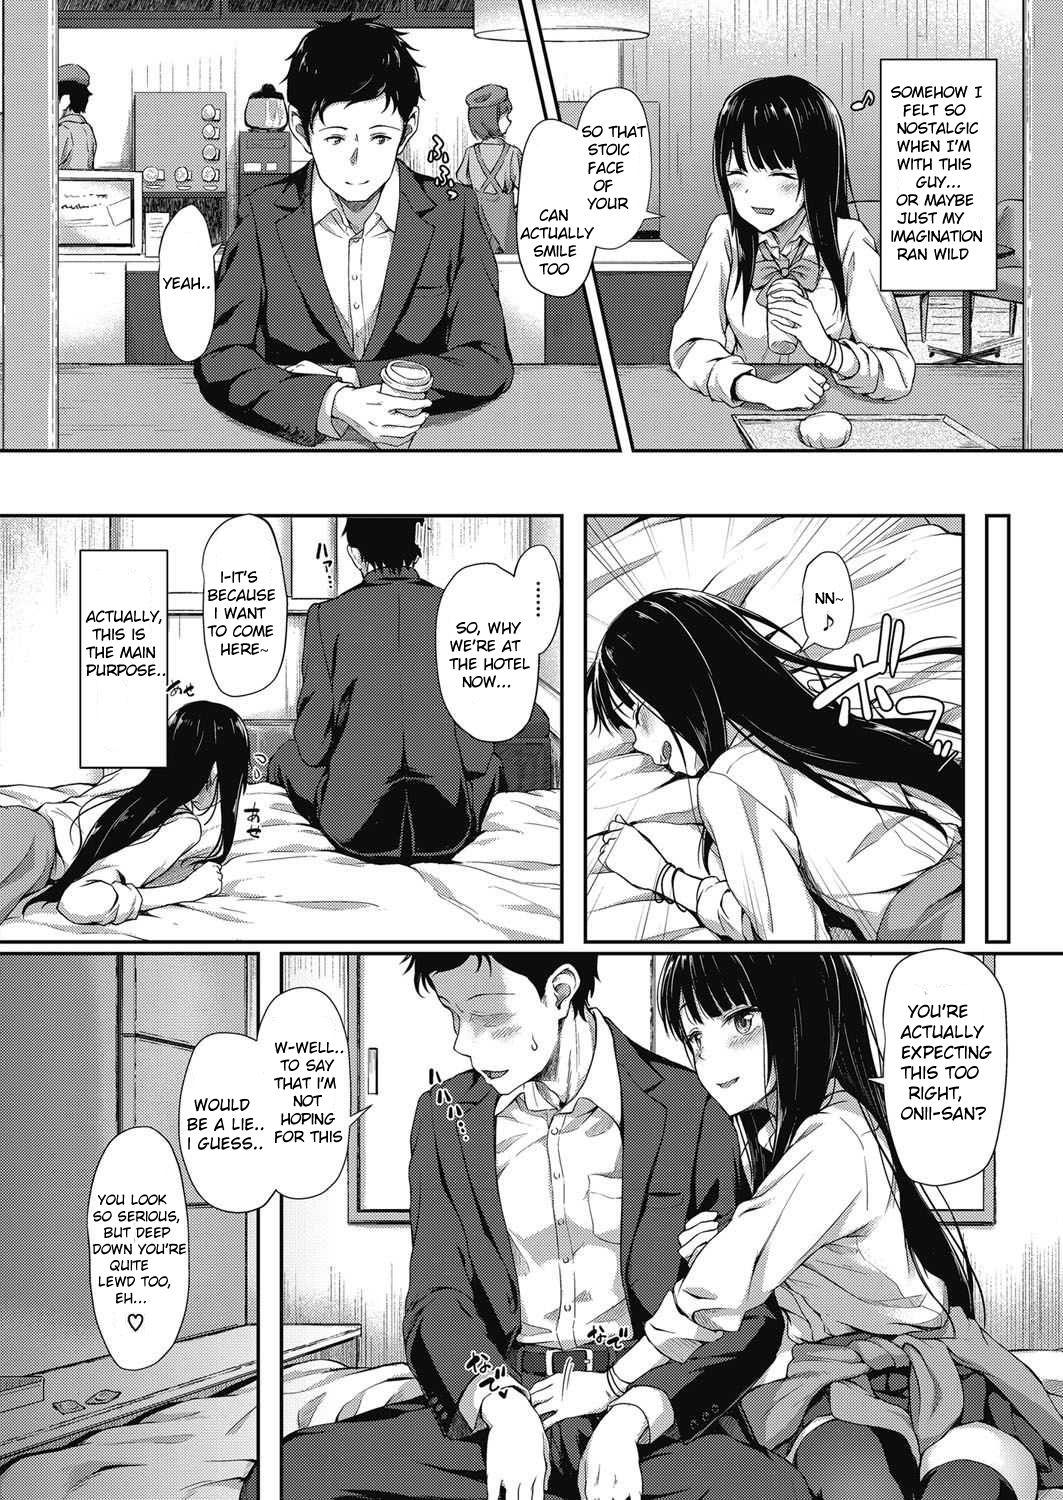 Cock Ano Machi e Ikou | Let's go to That City Boy Fuck Girl - Page 4